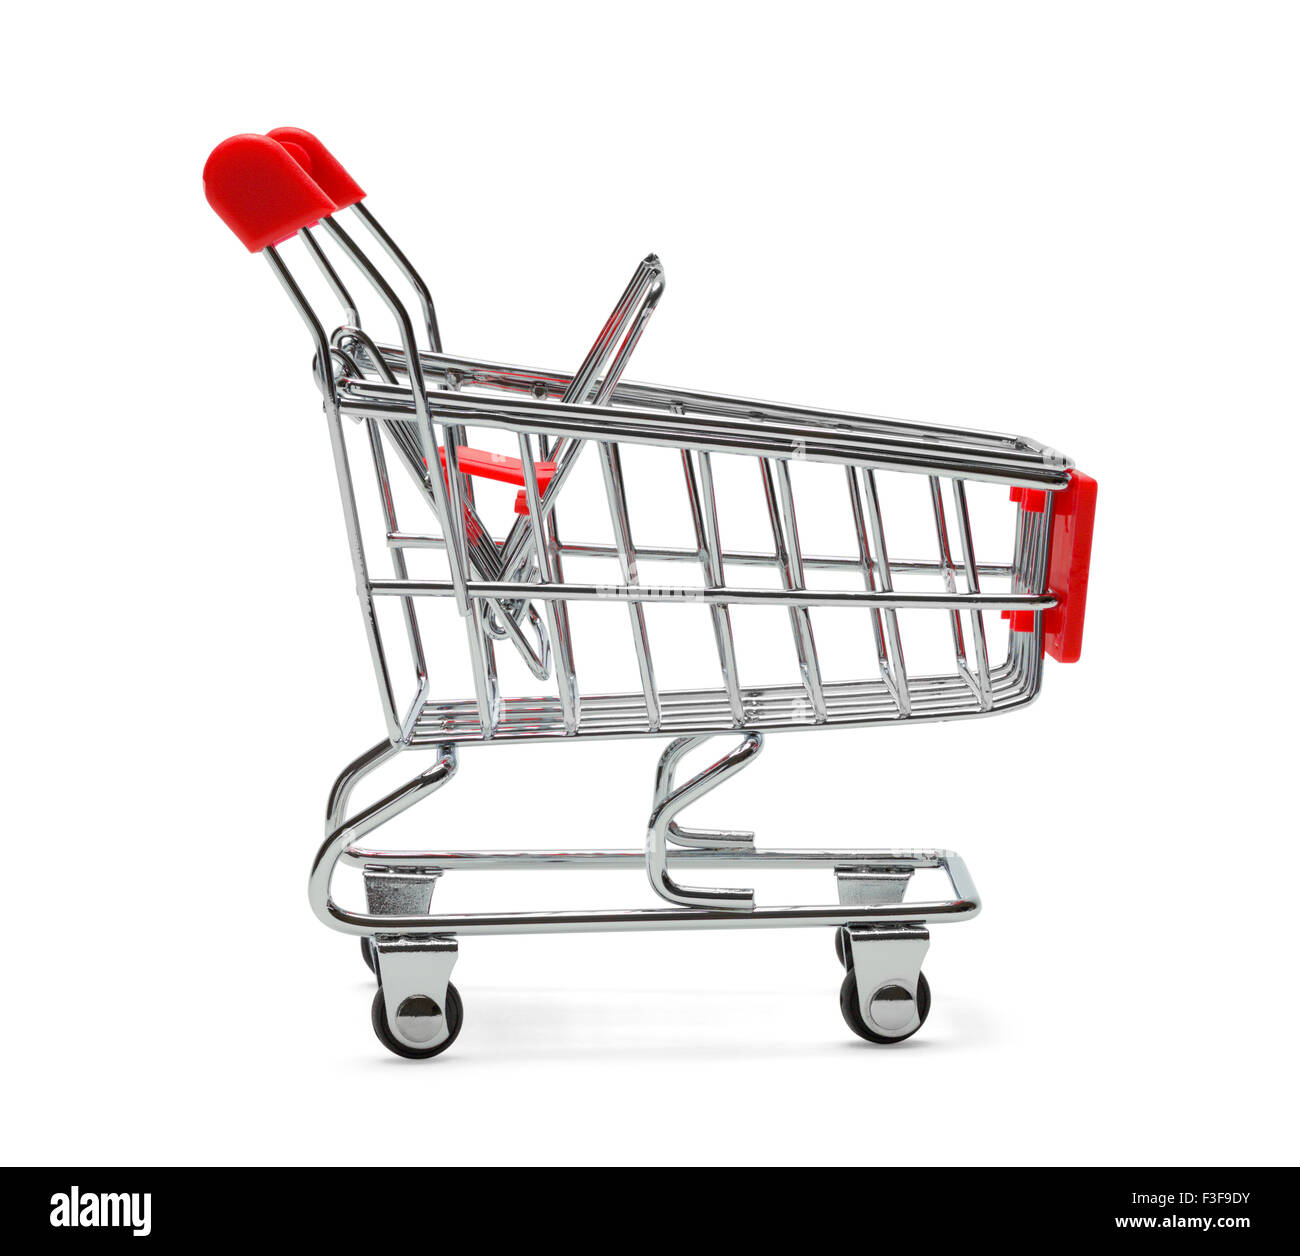 Red and Silver Shopping Cart Isolated on White Background. Stock Photo